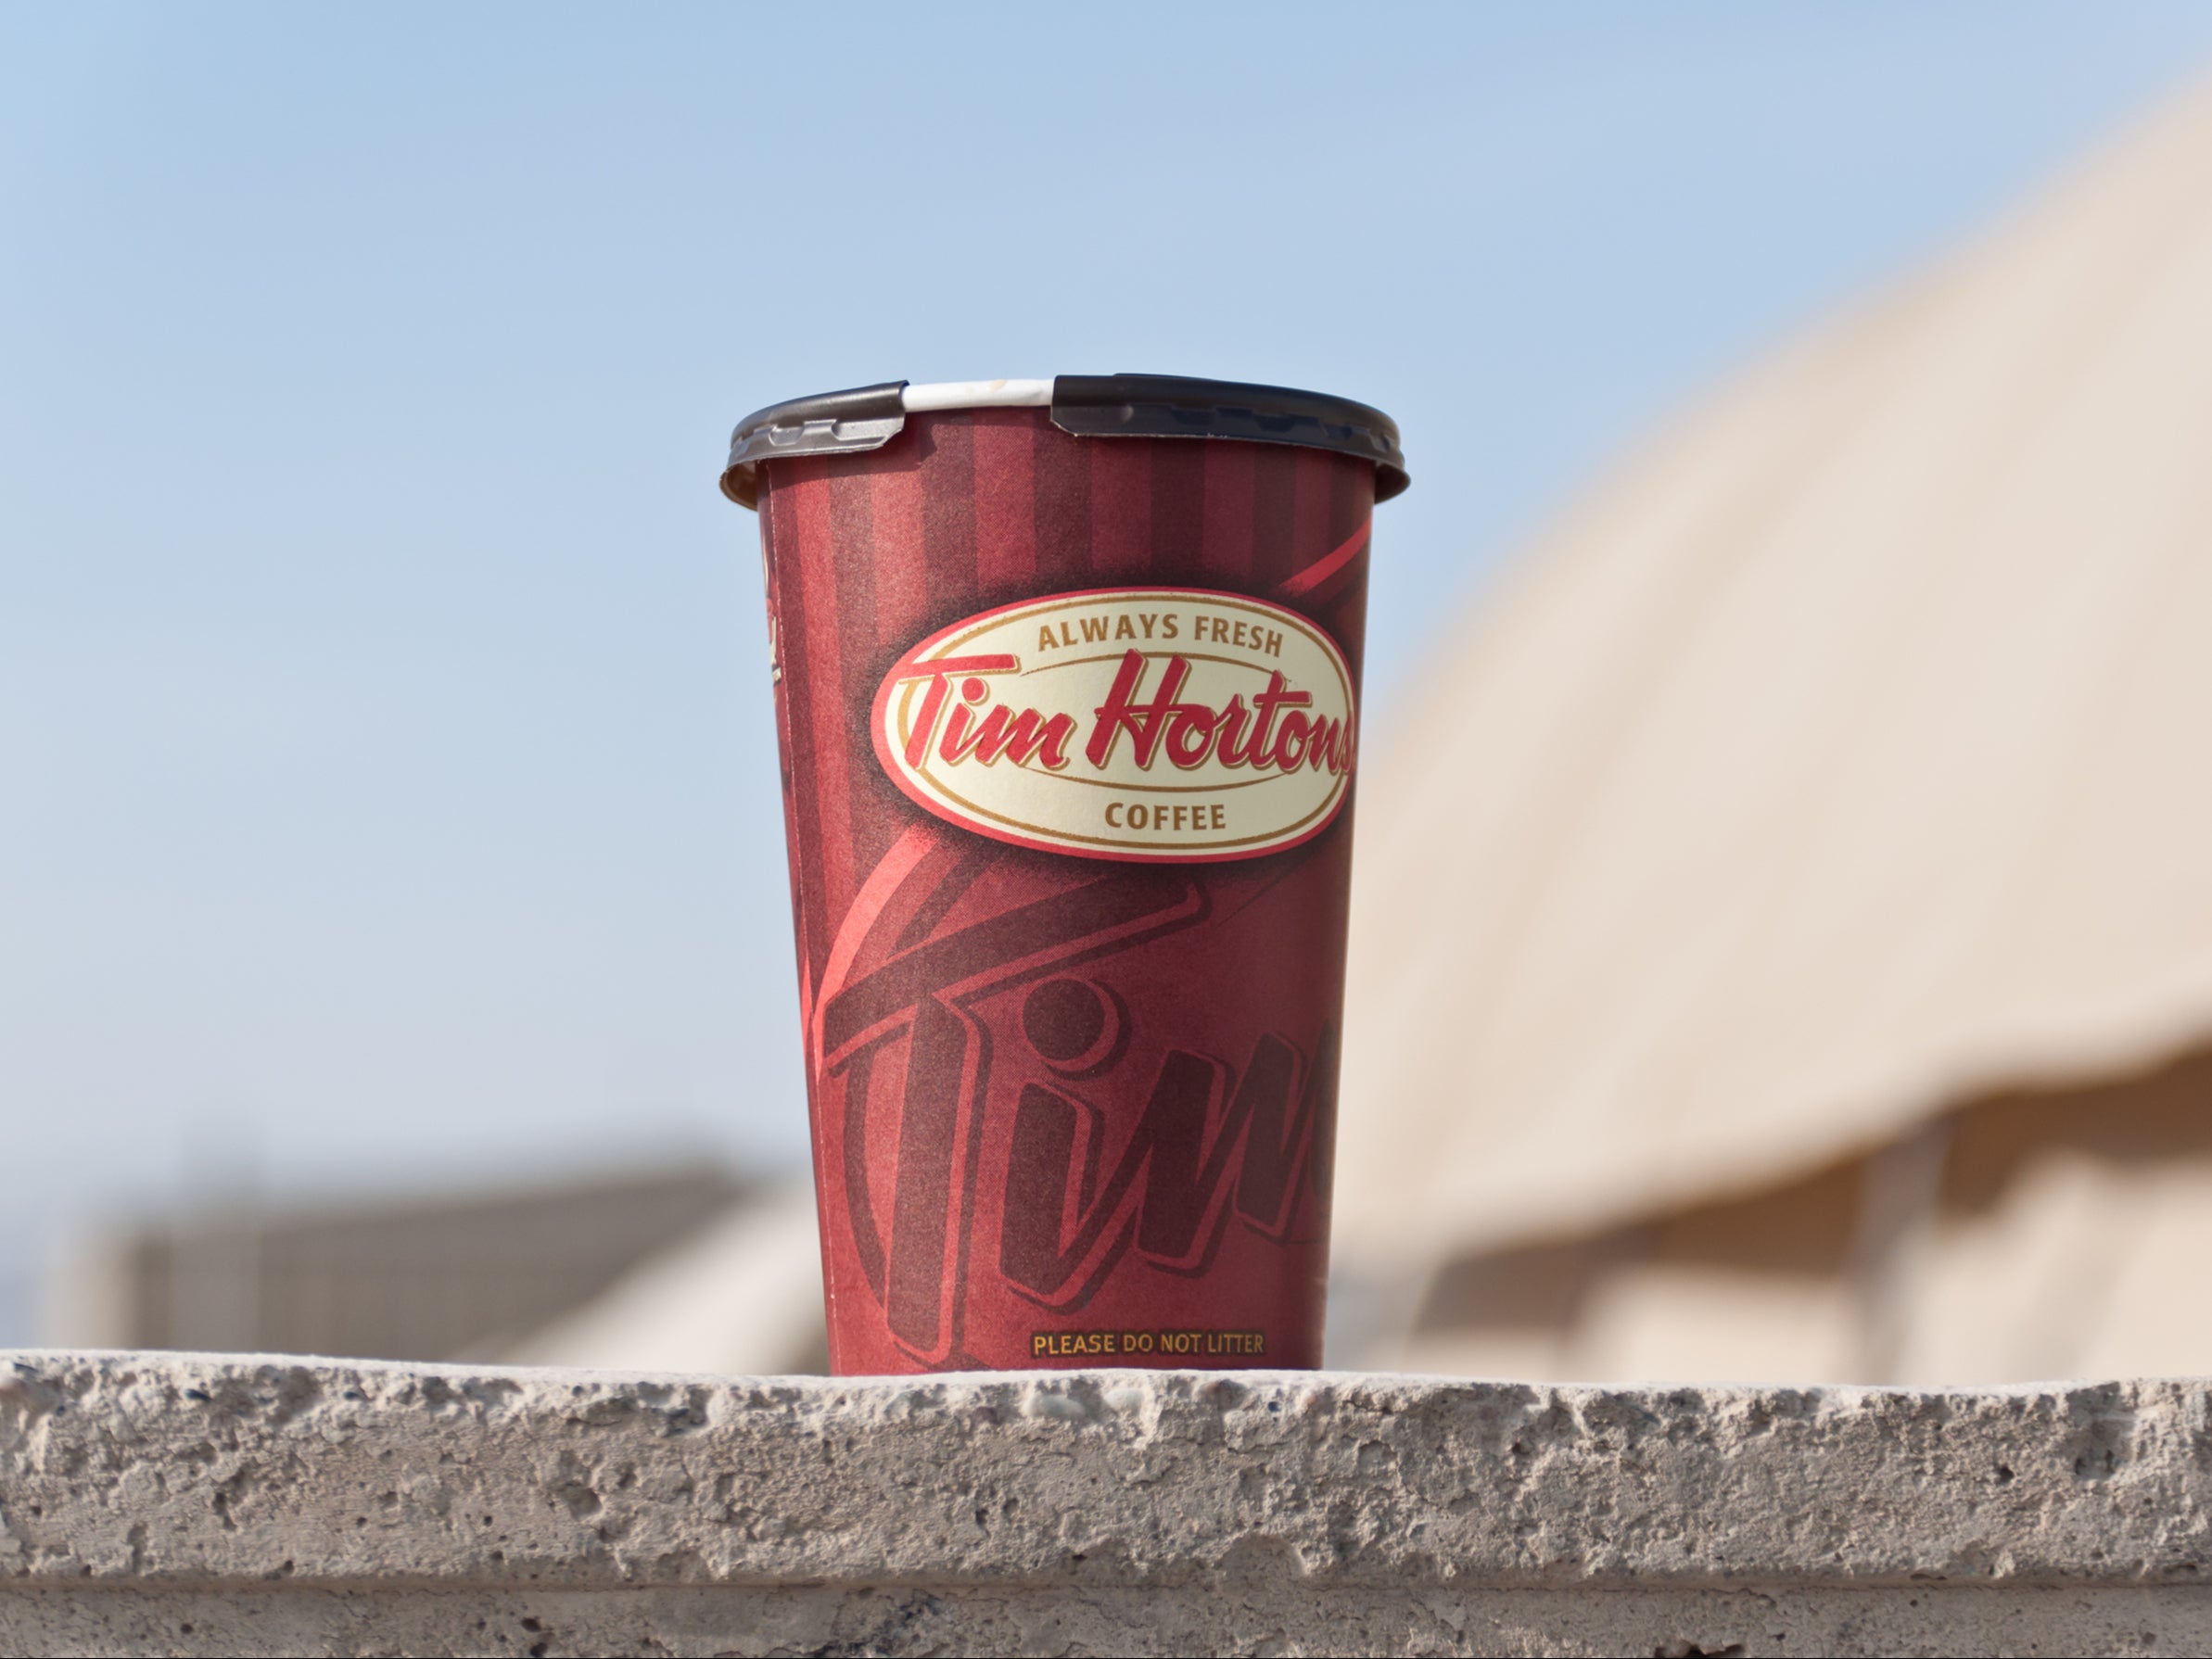 Starting today': Tim Hortons introduces new lunch and dinner menu